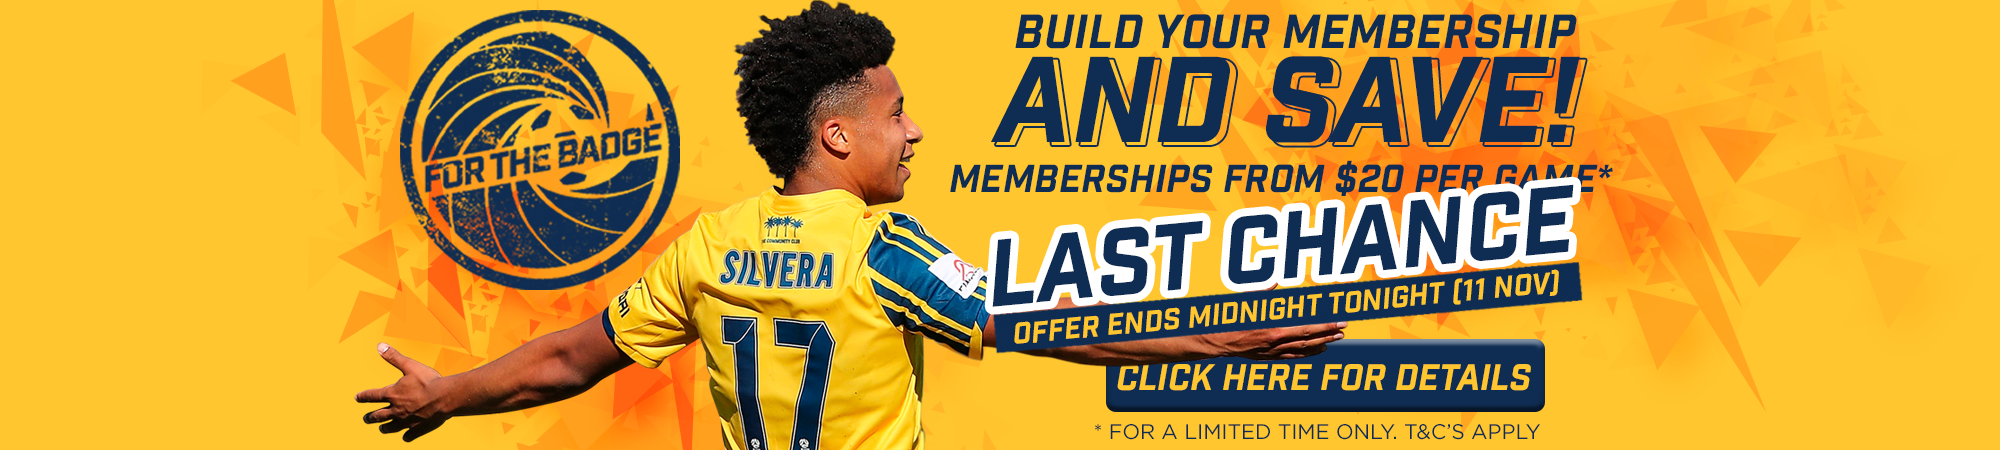 Last chance to build your own Membership